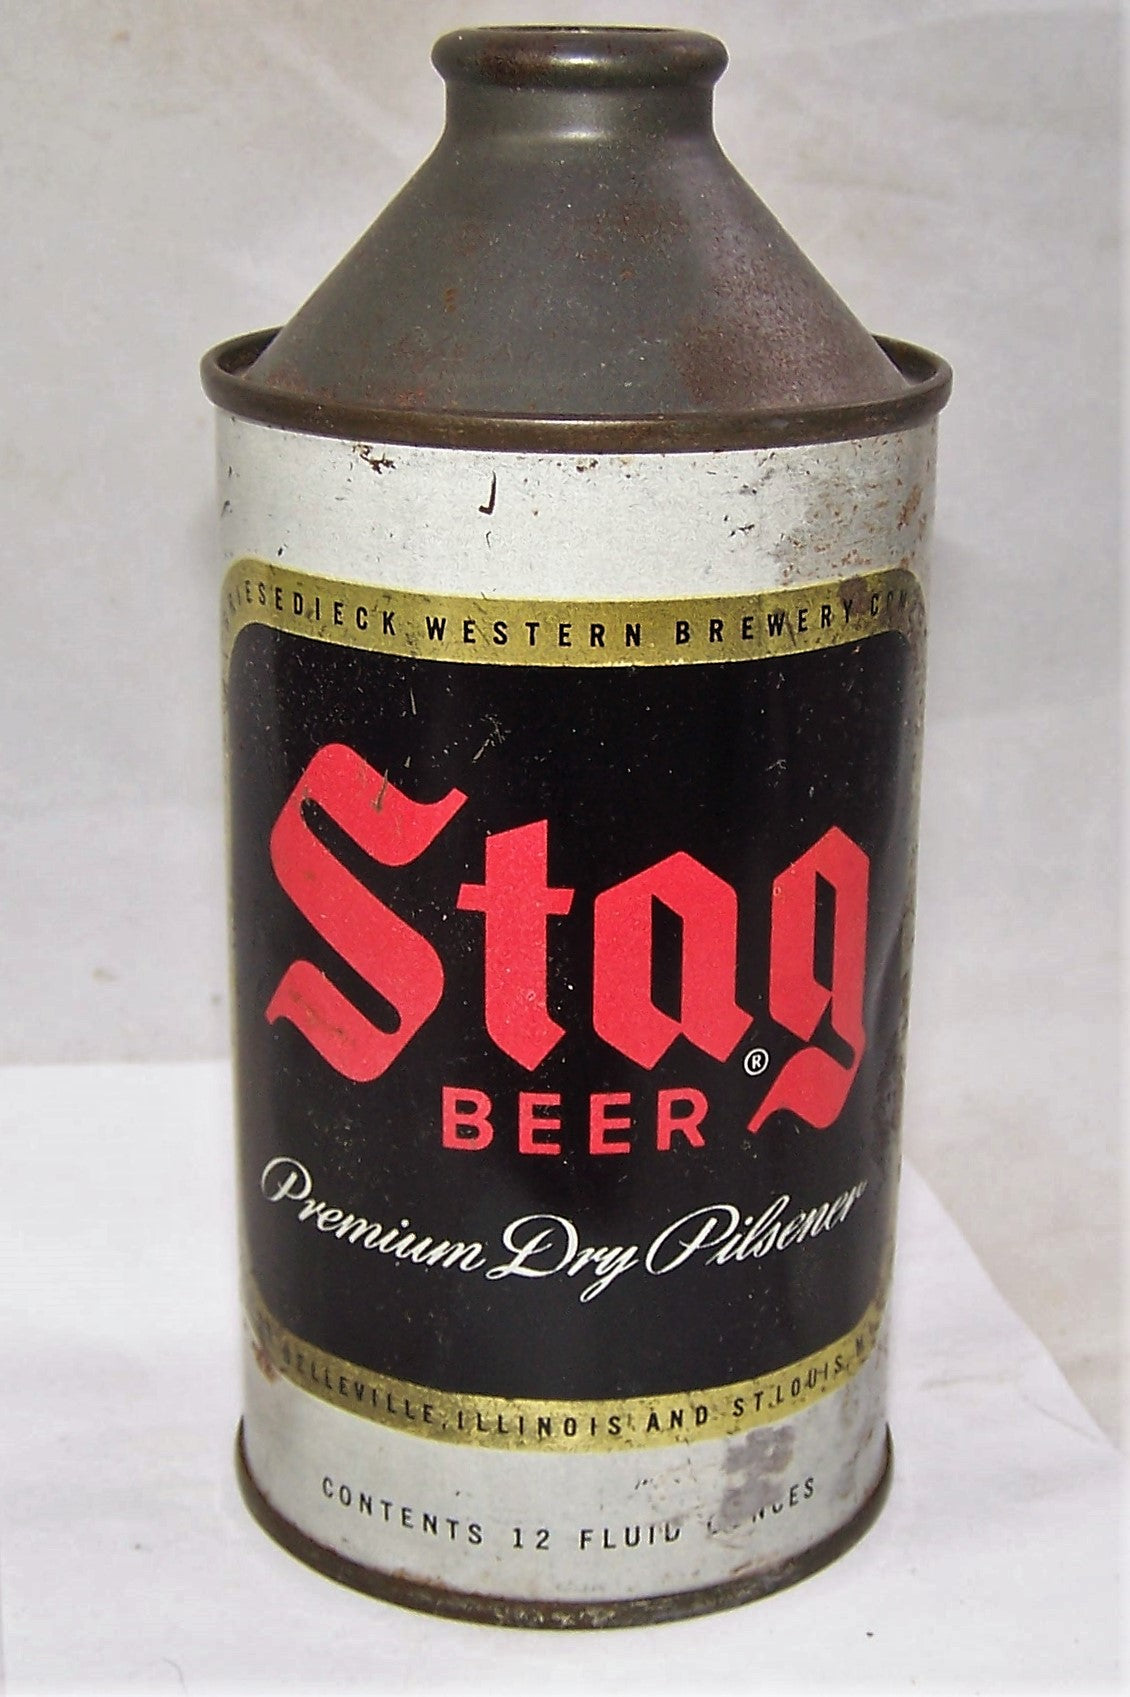 Stag Cone Top Beer Can